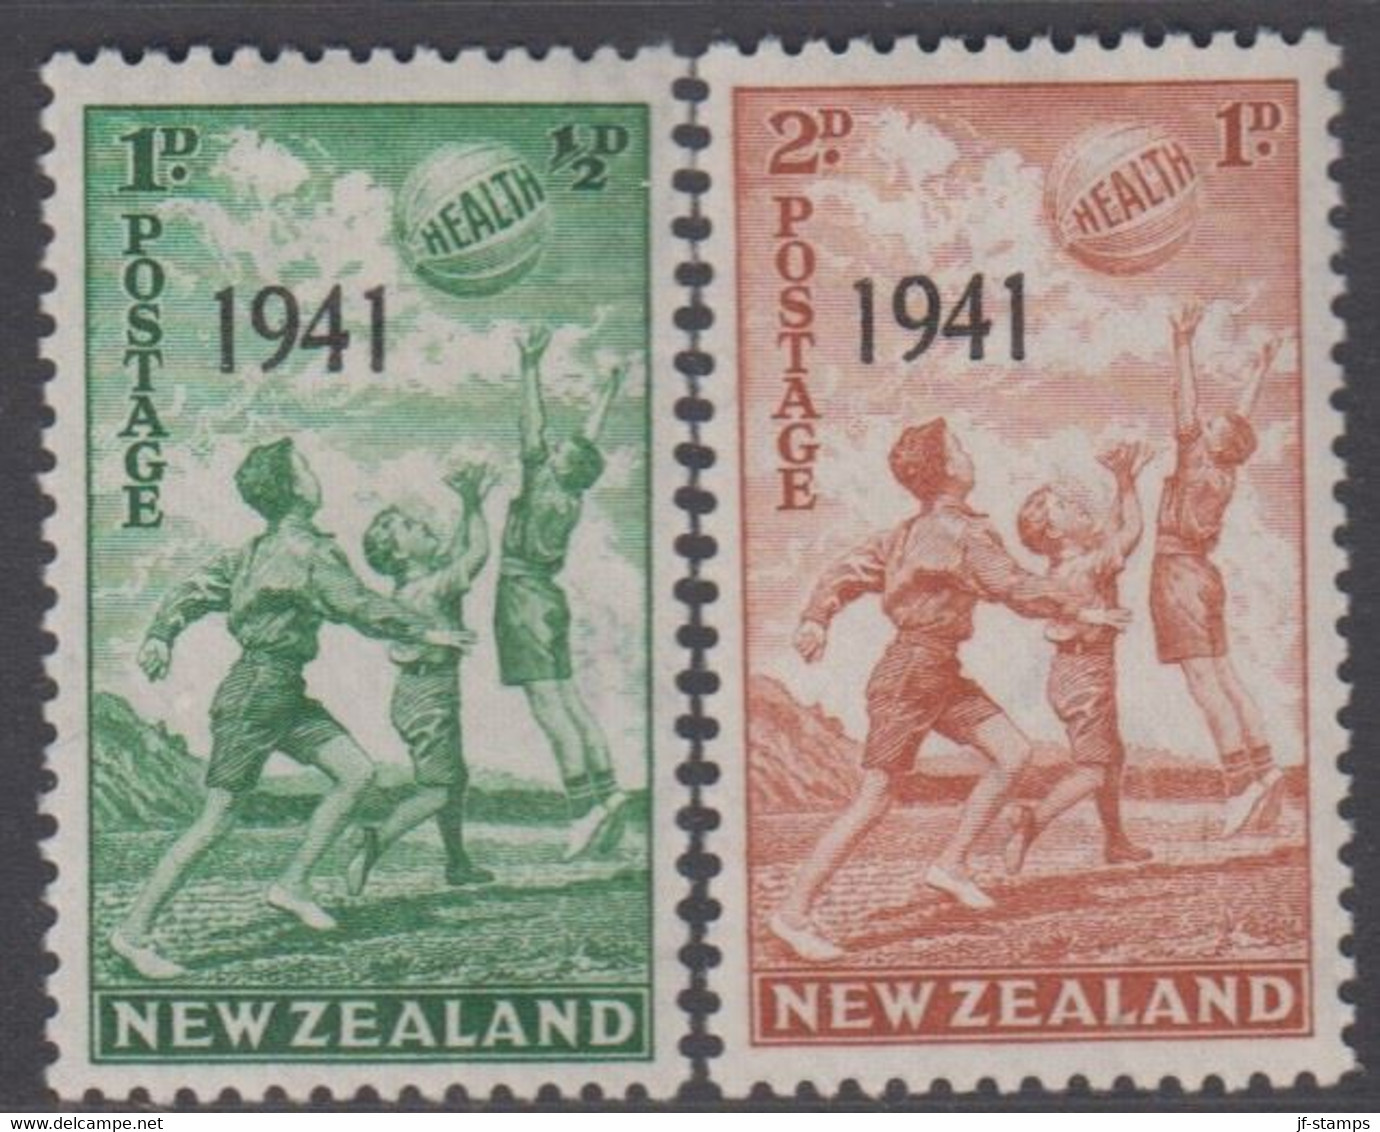 1941. New Zealand. HEALTH. Complete Set Hinged.  (MICHEL 271-272) - JF418376 - Covers & Documents